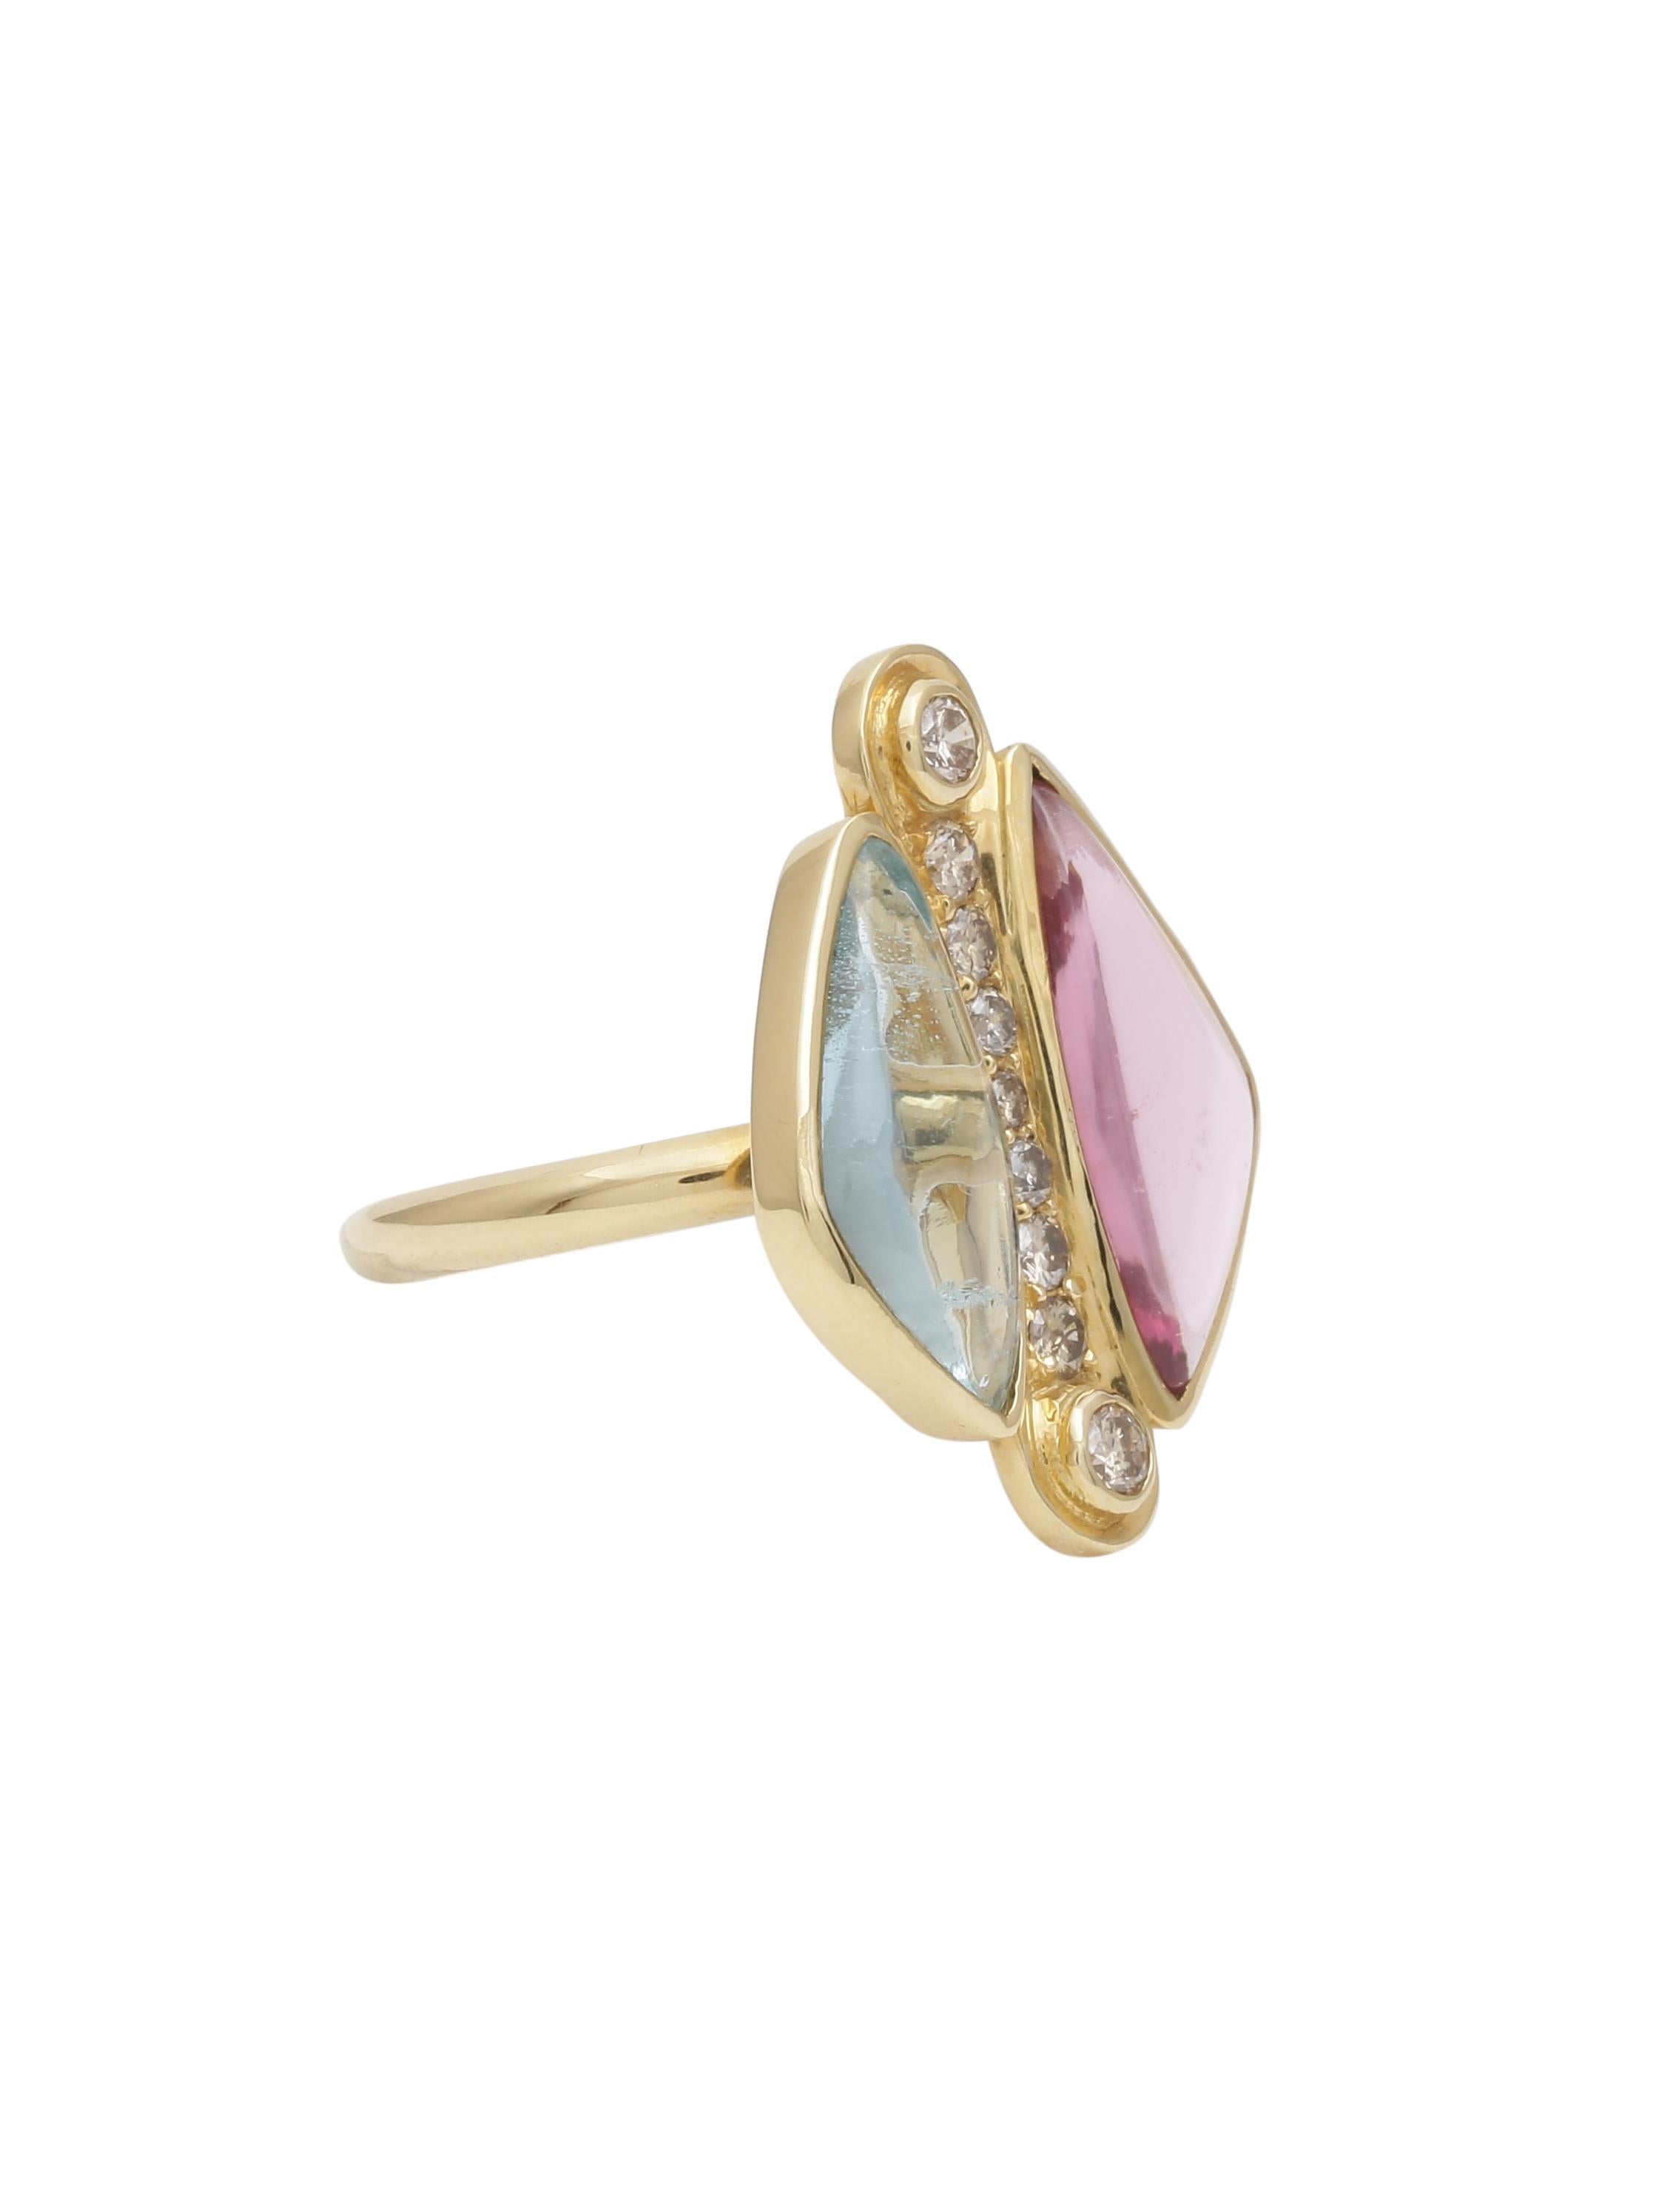 A ring with customised size Aquamarine and natural spinel put together with a line of graduating diamonds in the centre. The Stones were cut for each other as the colours are both pastel and soothing.
The ring is Handcrafted in 18K yellow Gold.
Its